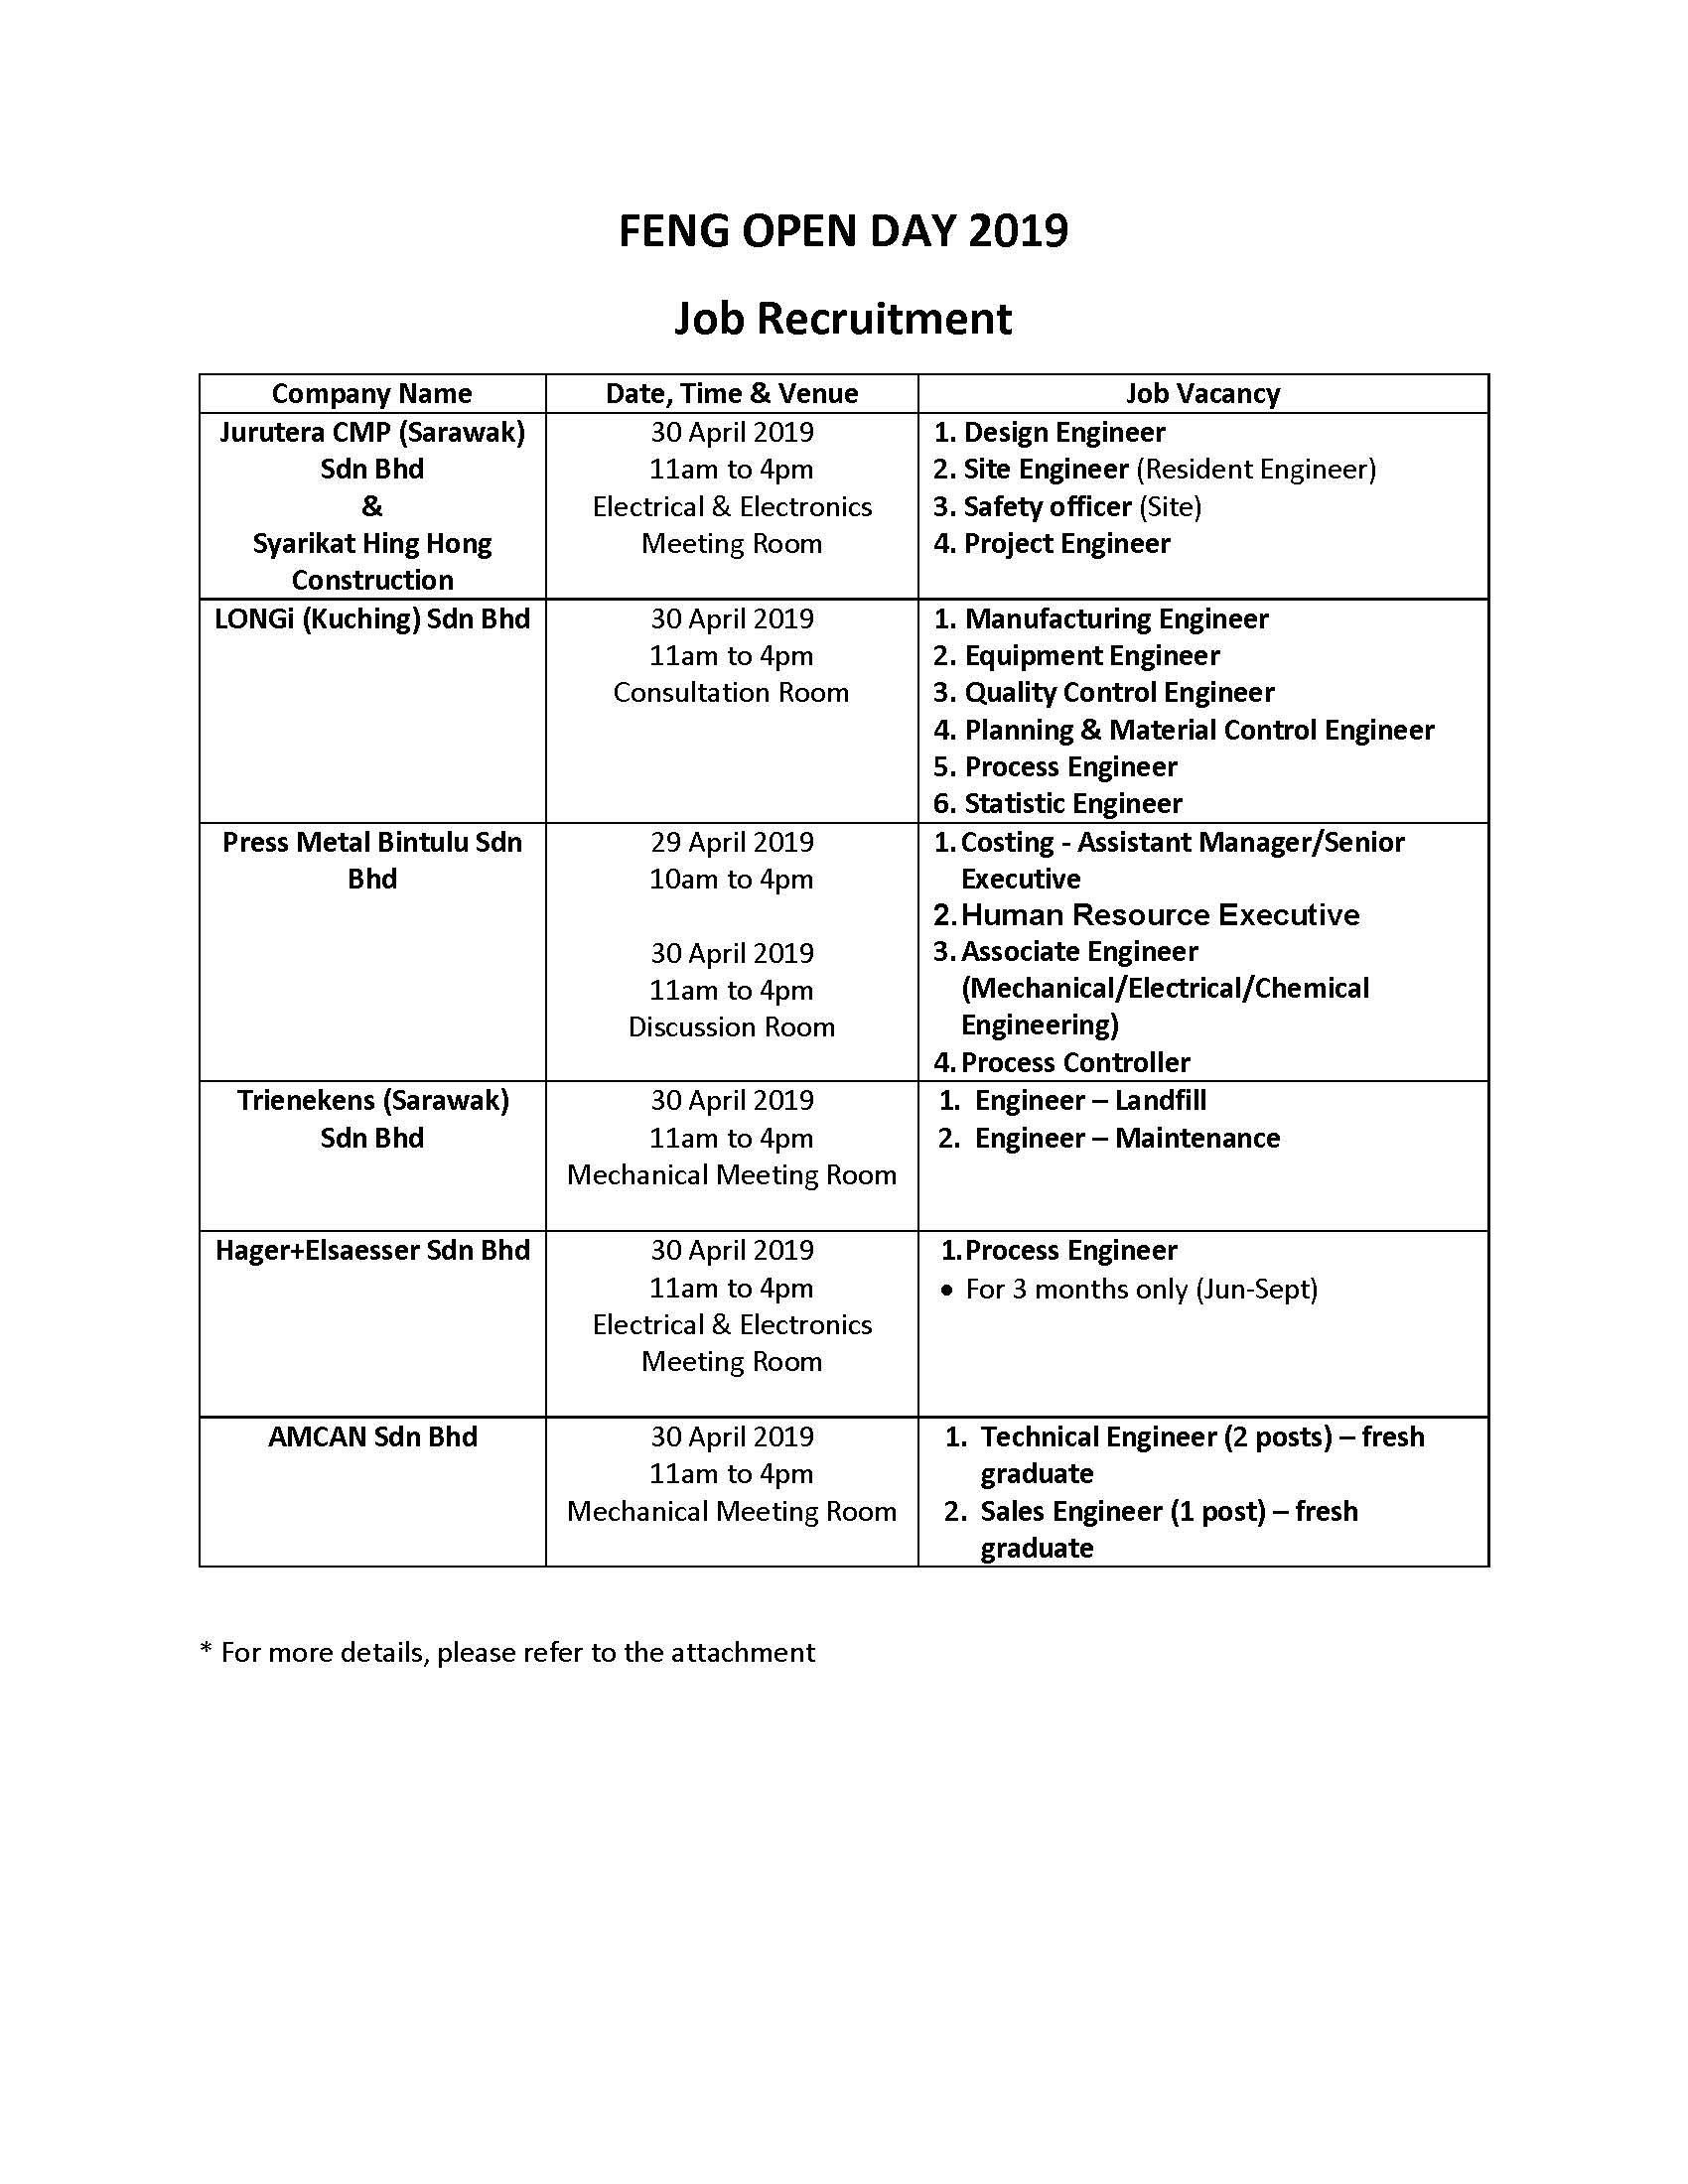 FENG Open Day 2019_Job Recruitment updated (1)_Page_01.jpg